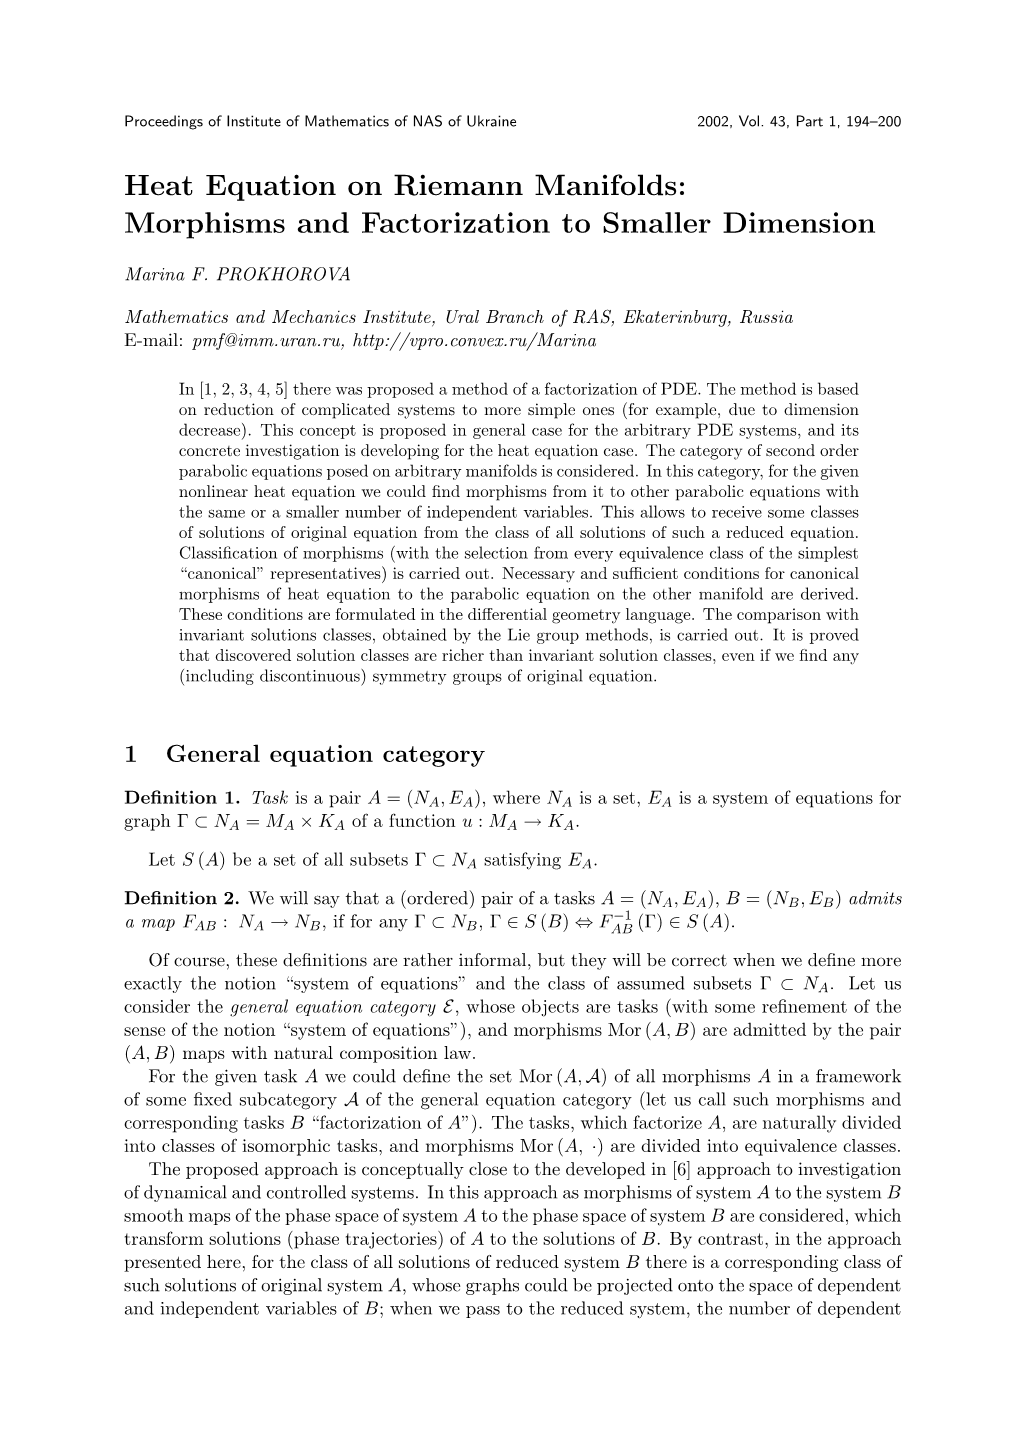 Heat Equation on Riemann Manifolds: Morphisms and Factorization to Smaller Dimension